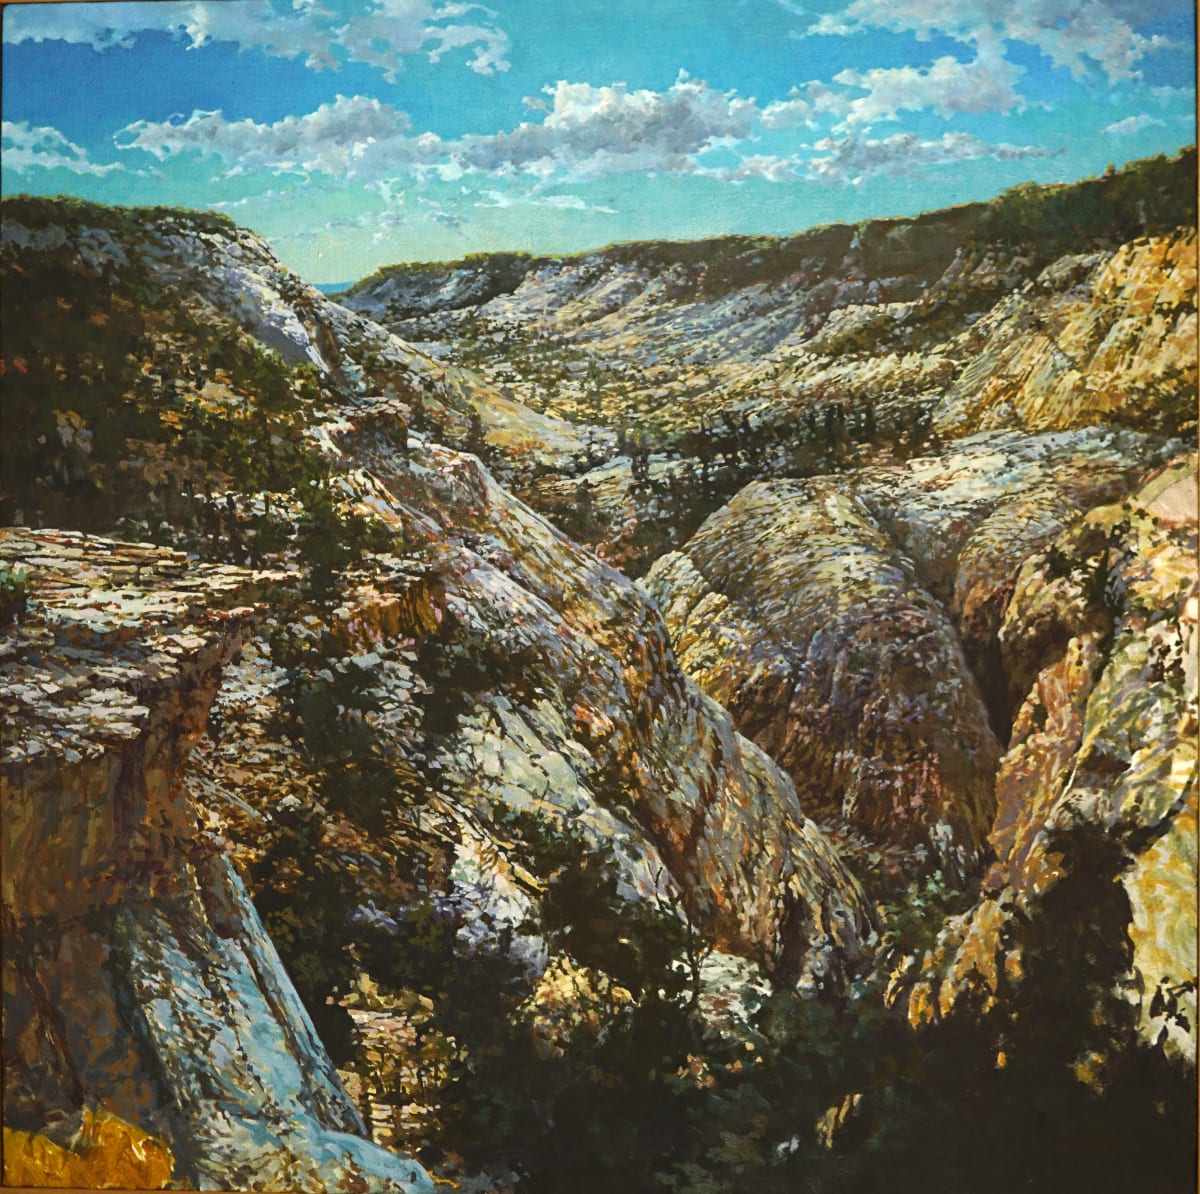 Deer Creek Canyon by Bruce Marsh  Image: Painted onsite, SE Utah. I made annual trips there from 2005-2010. The light and the geology!!
